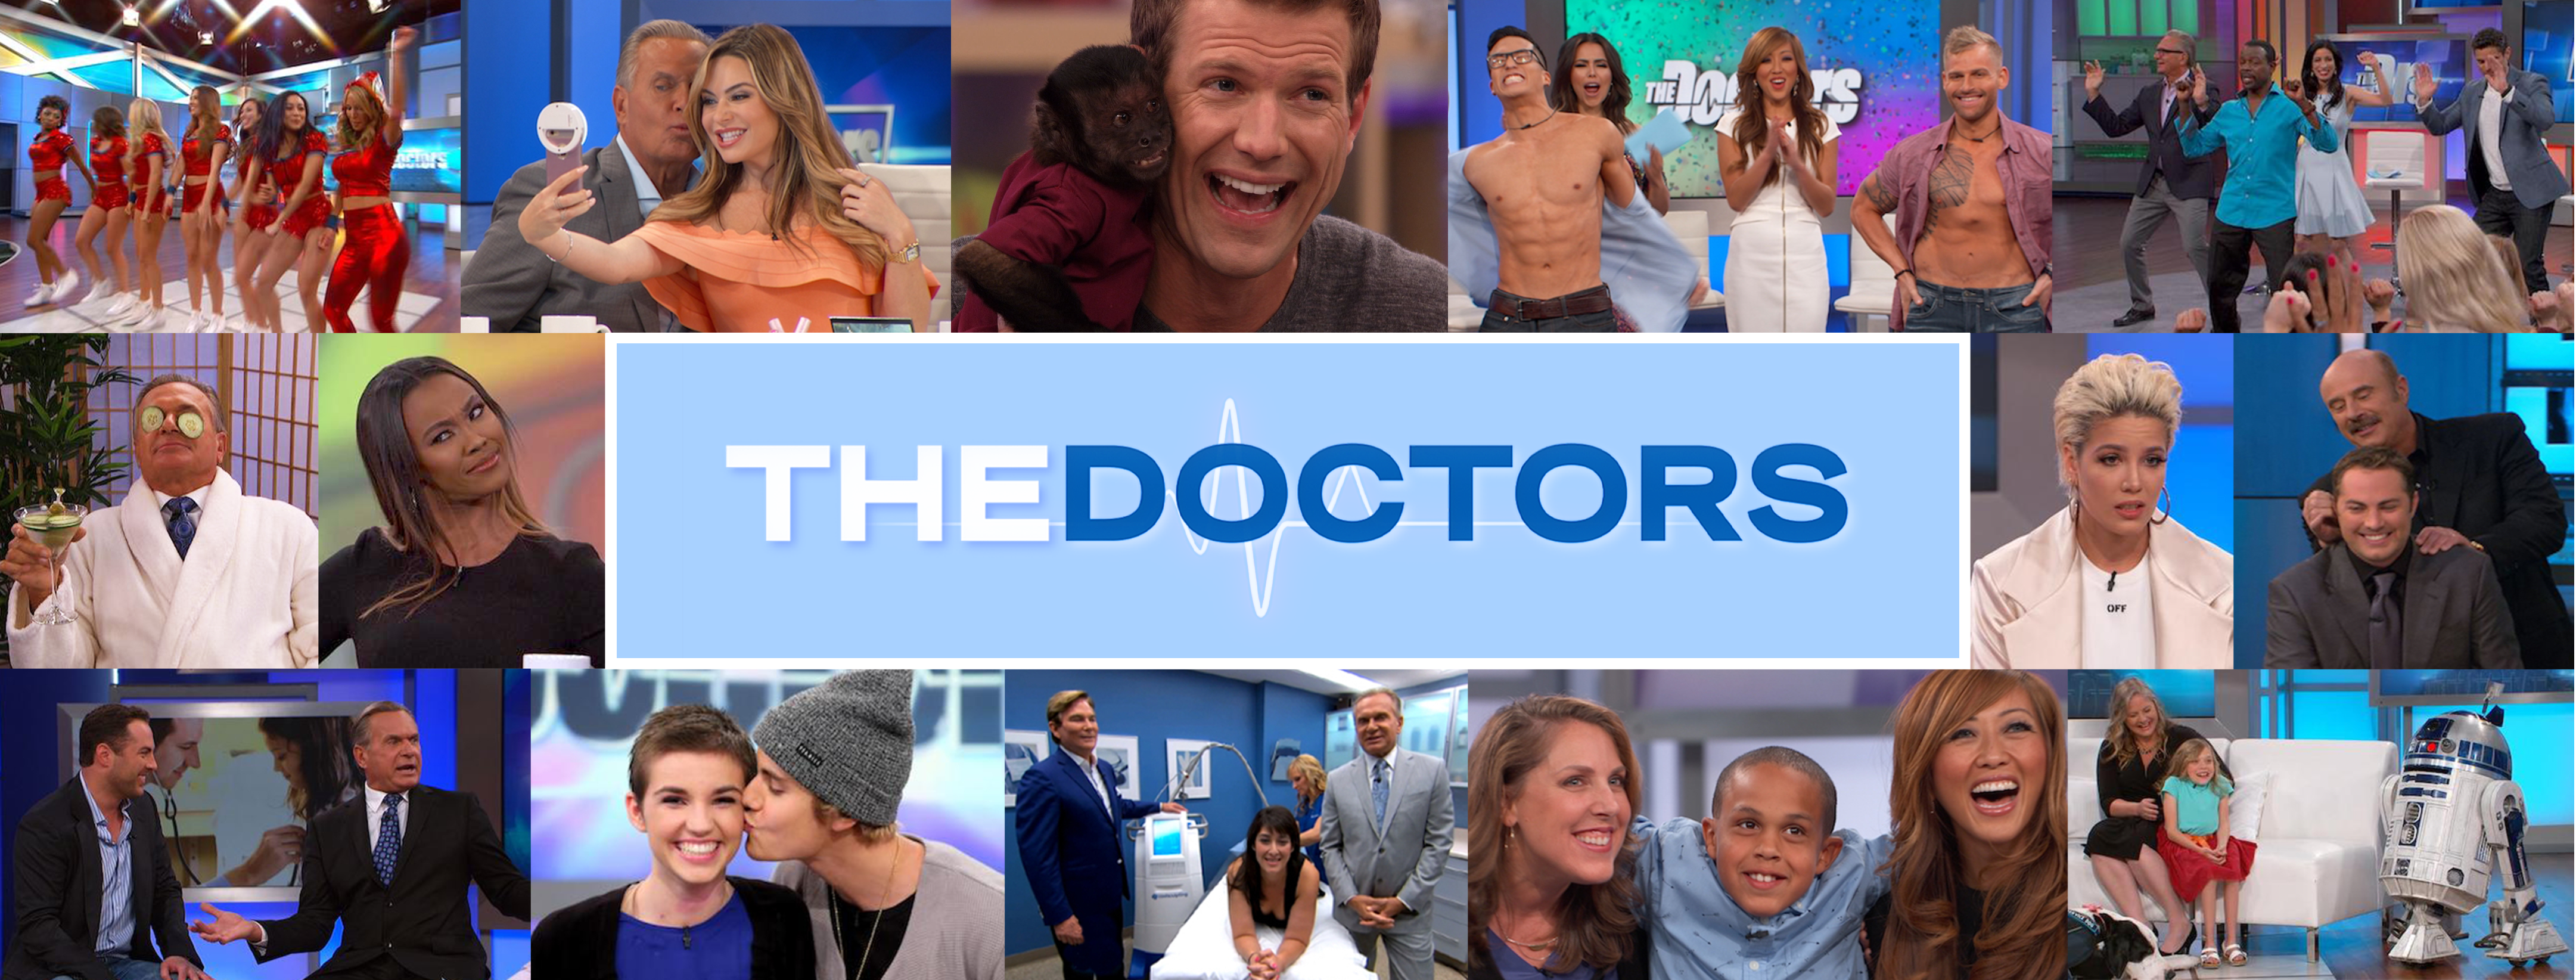 How This Woman Took Control Of Her Vaginismus The Doctors TV Show